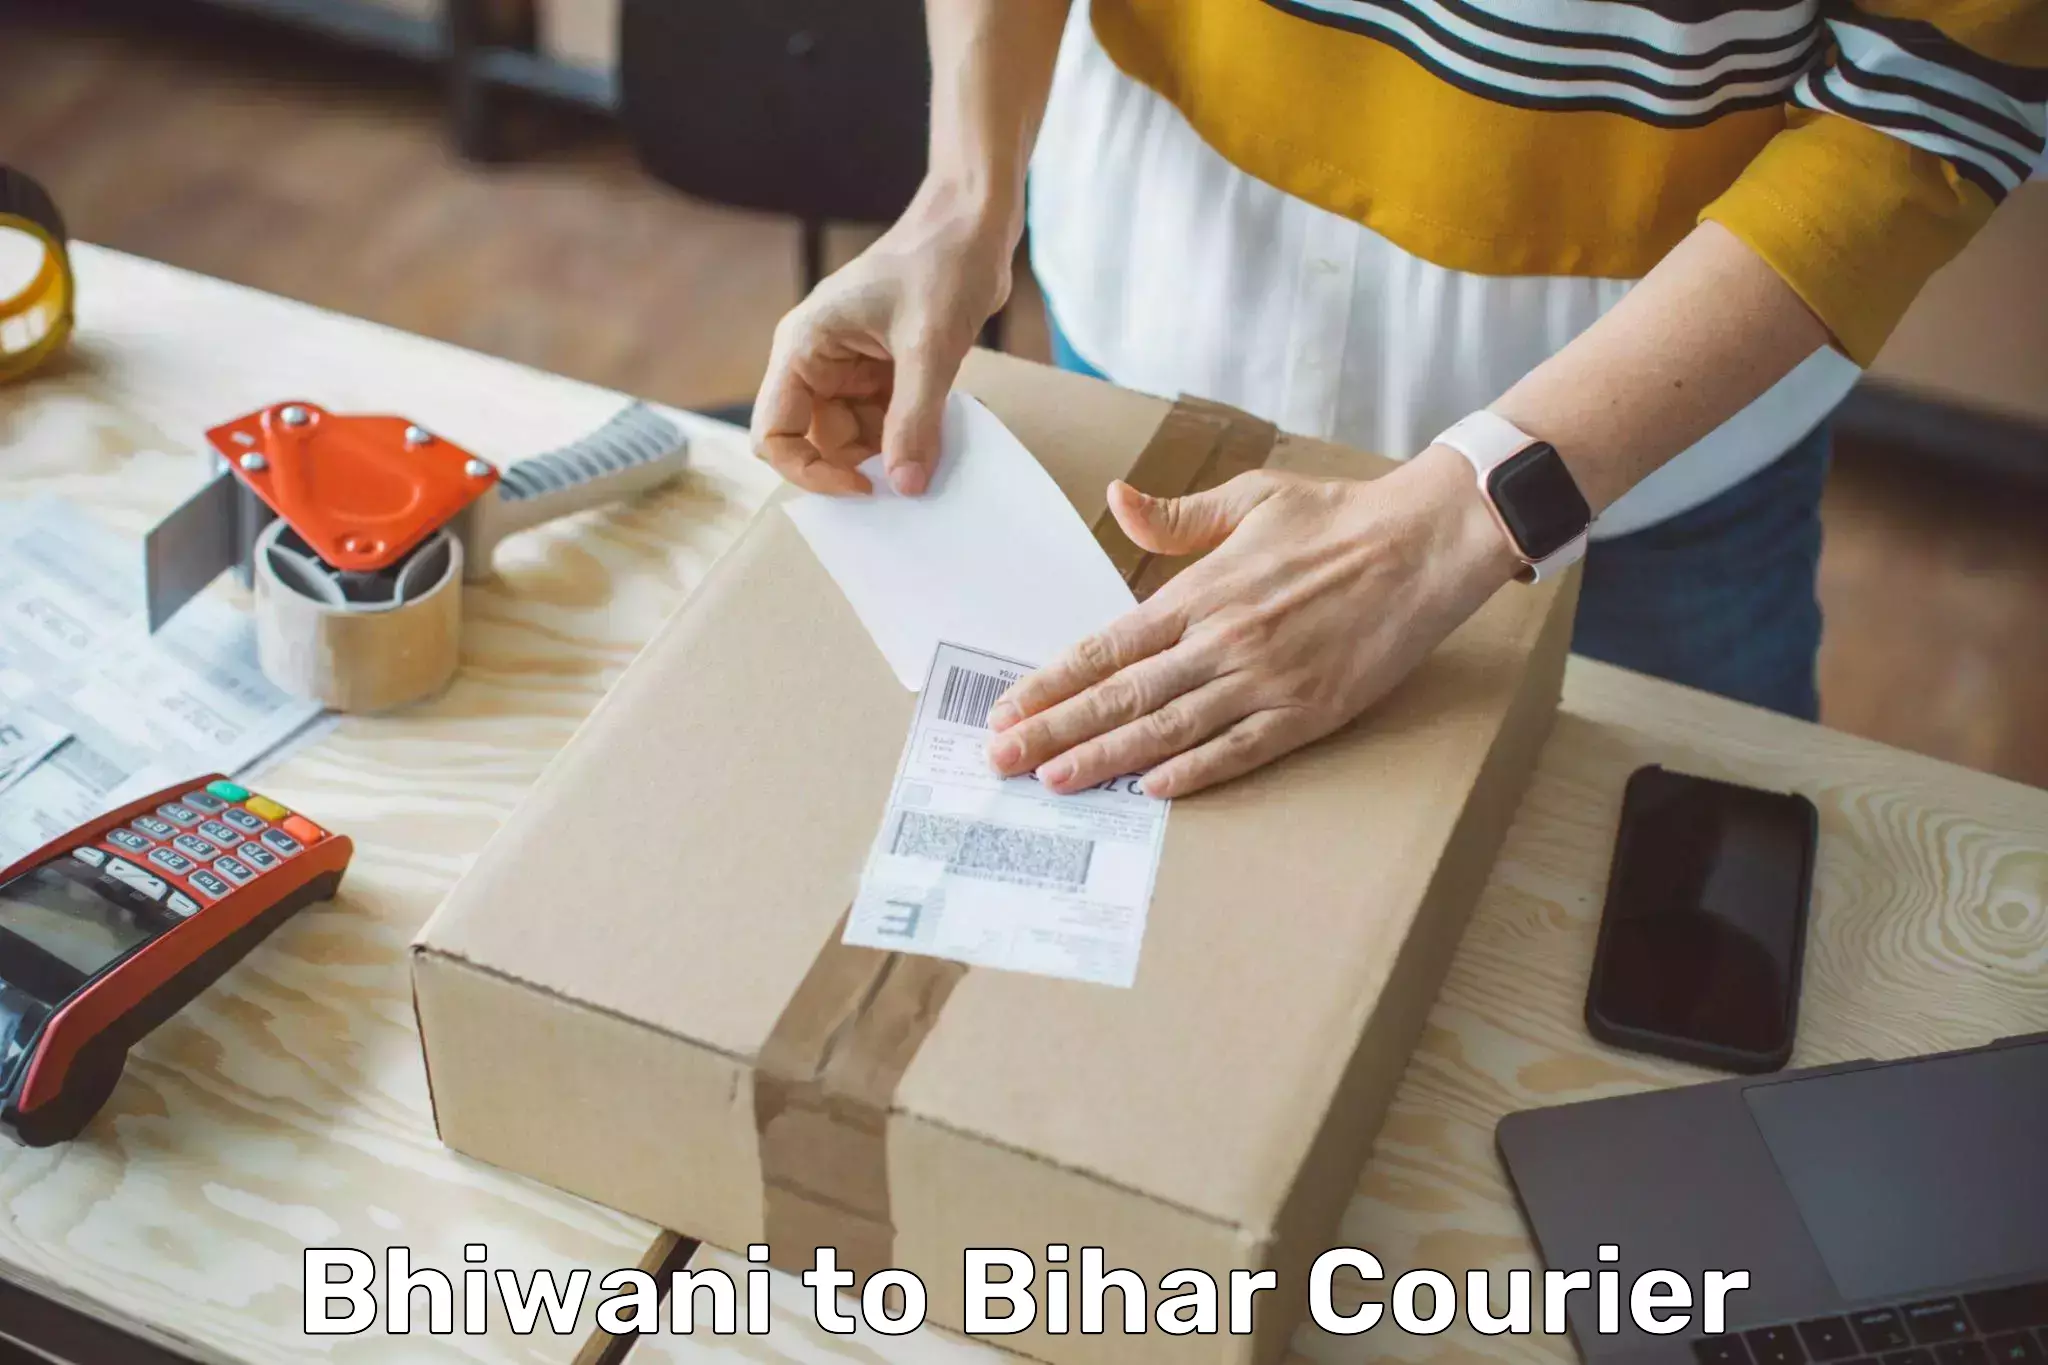 Package delivery network Bhiwani to Bihar